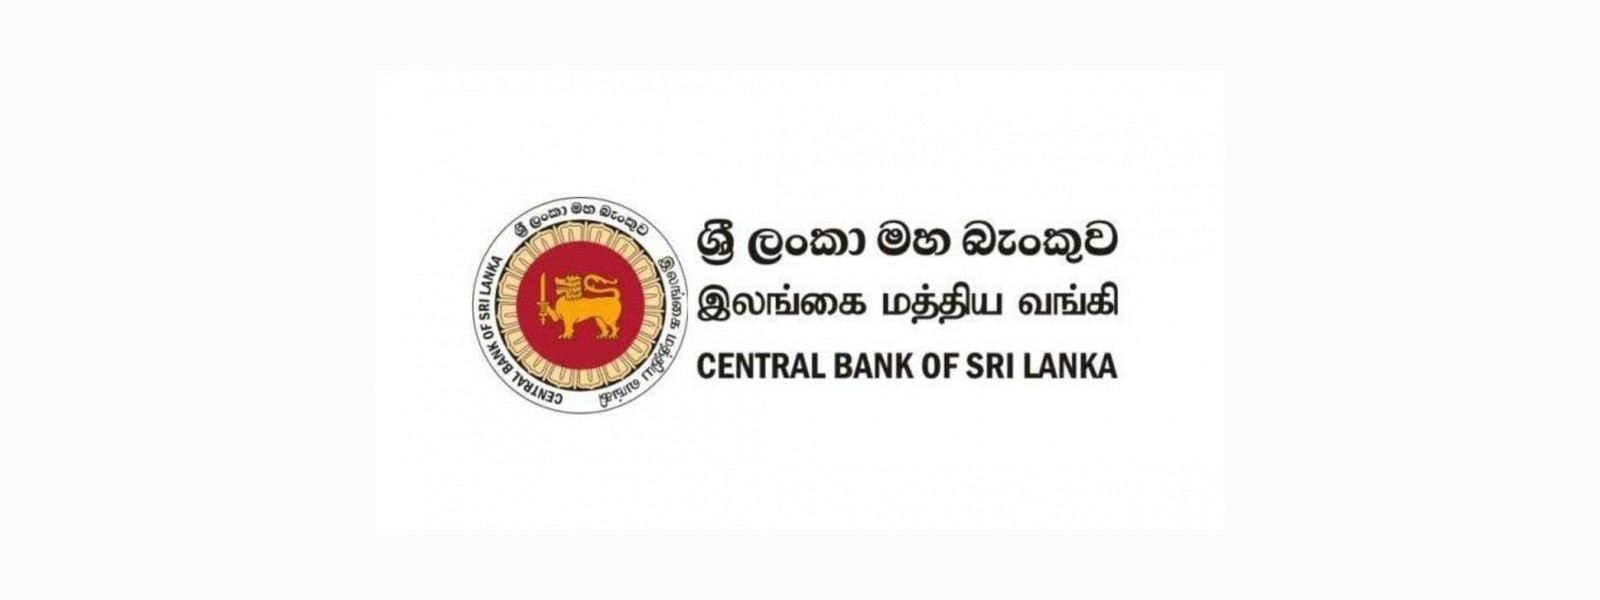 The Central Bank of Sri Lanka relaxes its Monetary Policy Stance